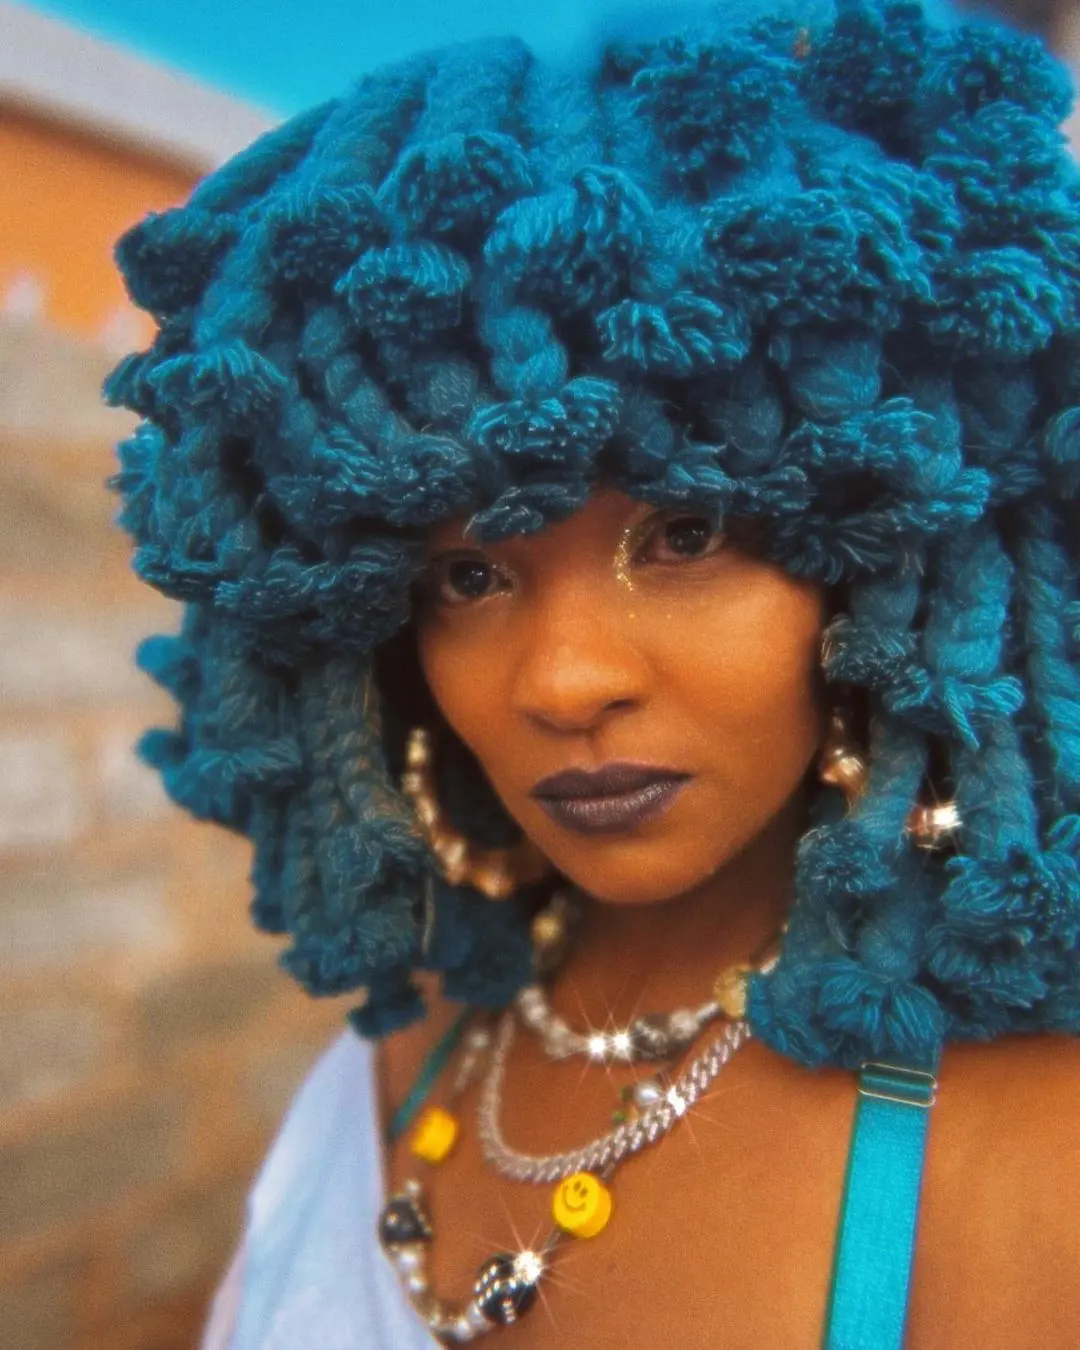 Moonchild Sanelly reveals how she feels being an international star